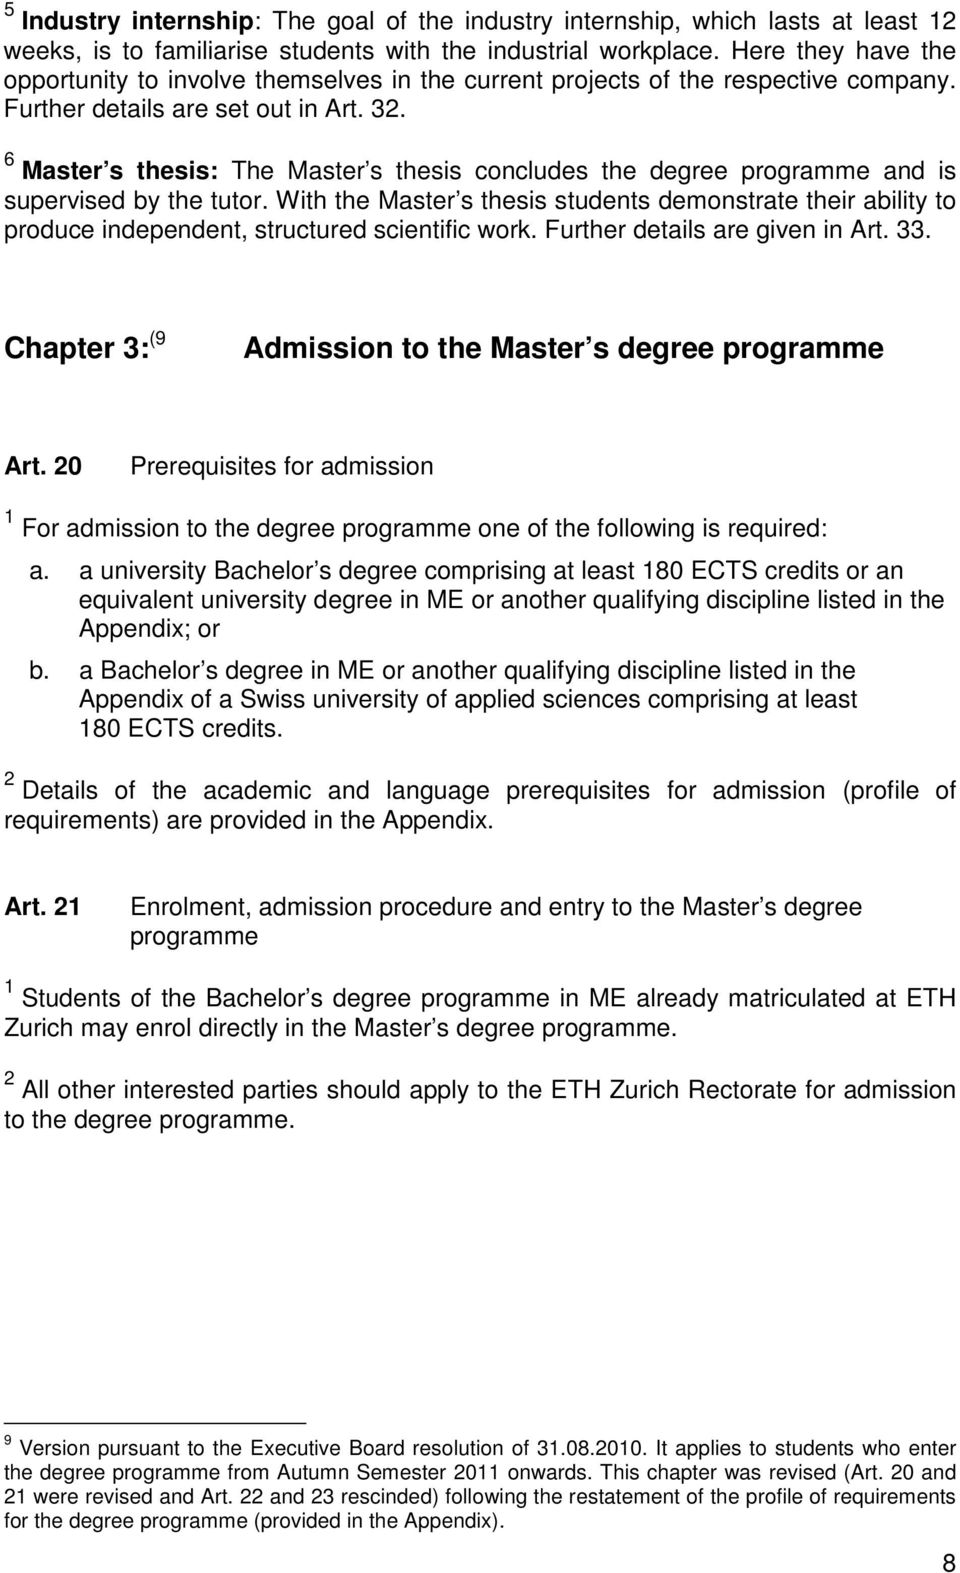 6 Master s thesis: The Master s thesis concludes the degree programme and is supervised by the tutor.